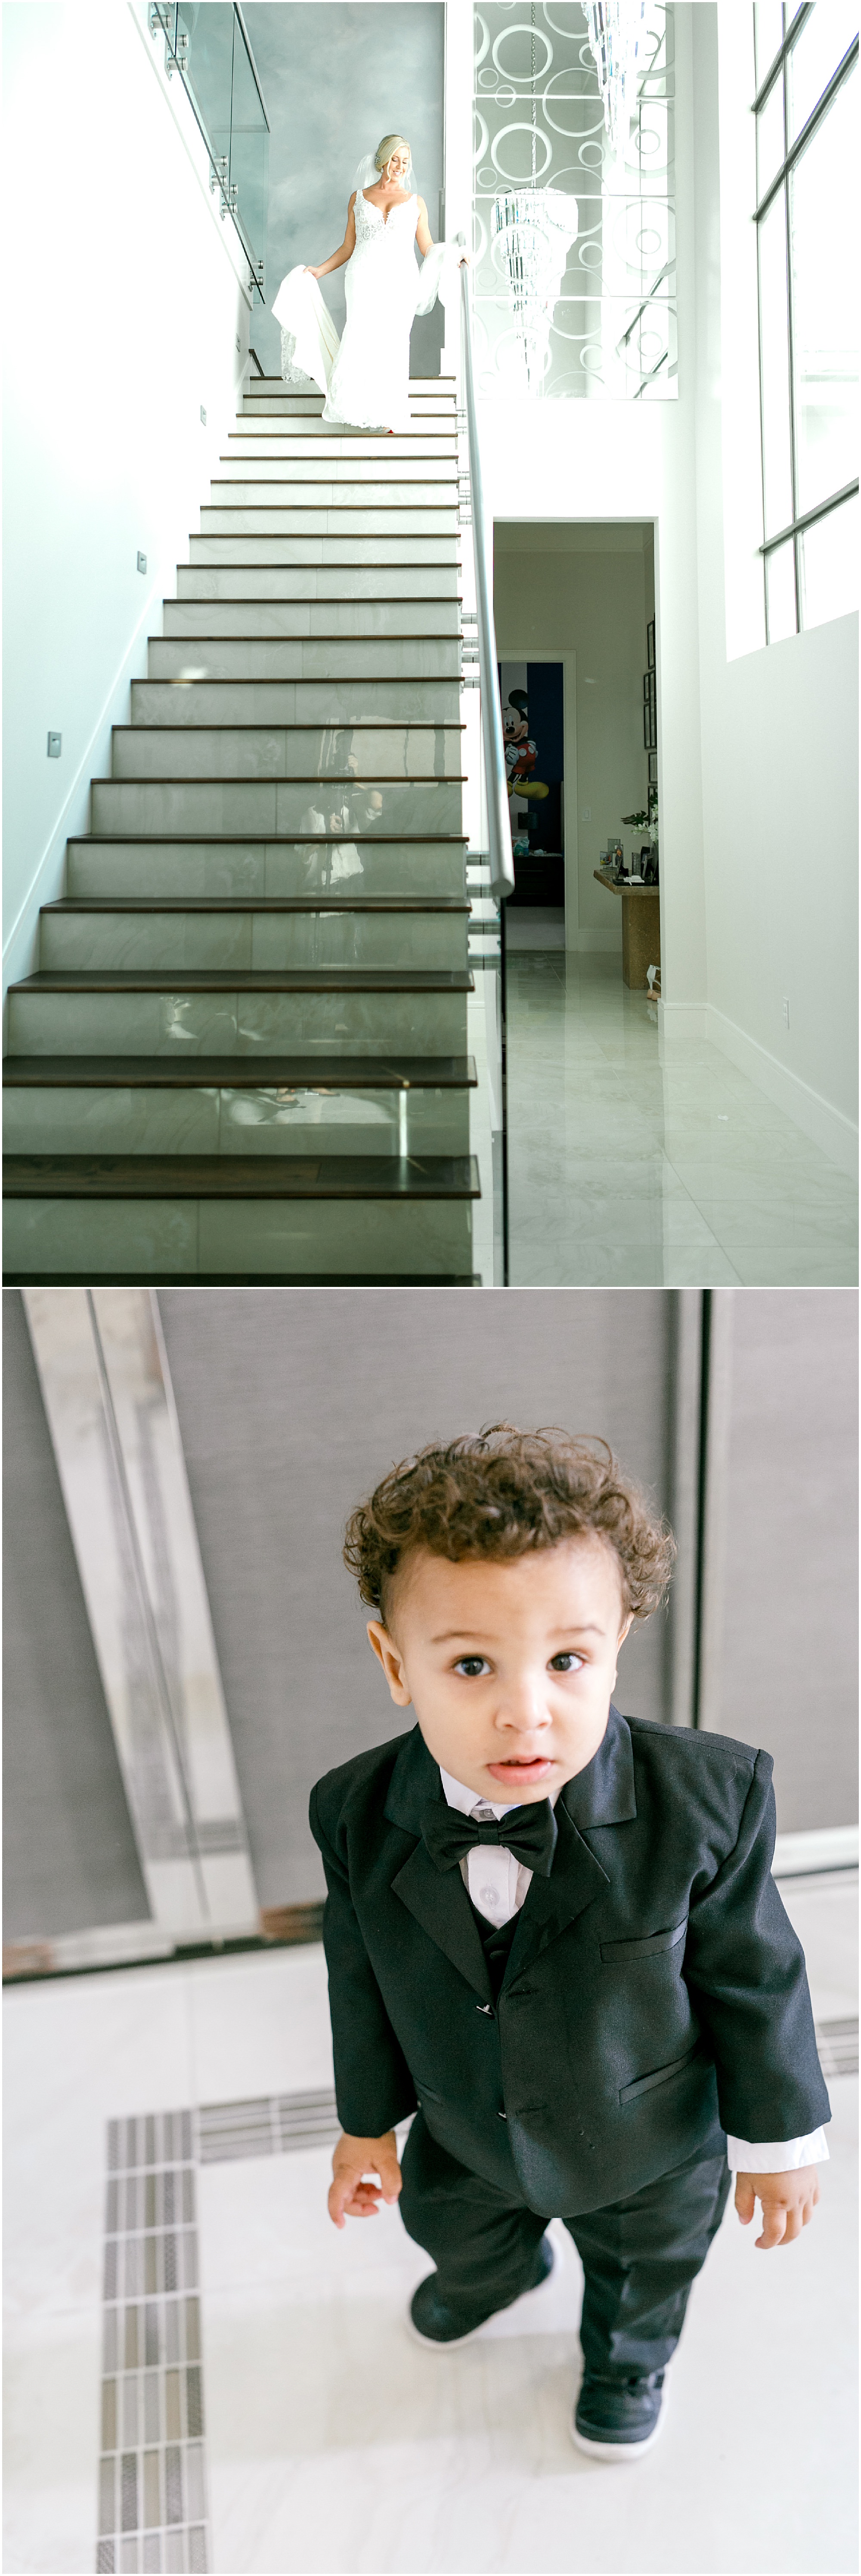 Bride walking down the stairs and her son watching her at the bottom. 